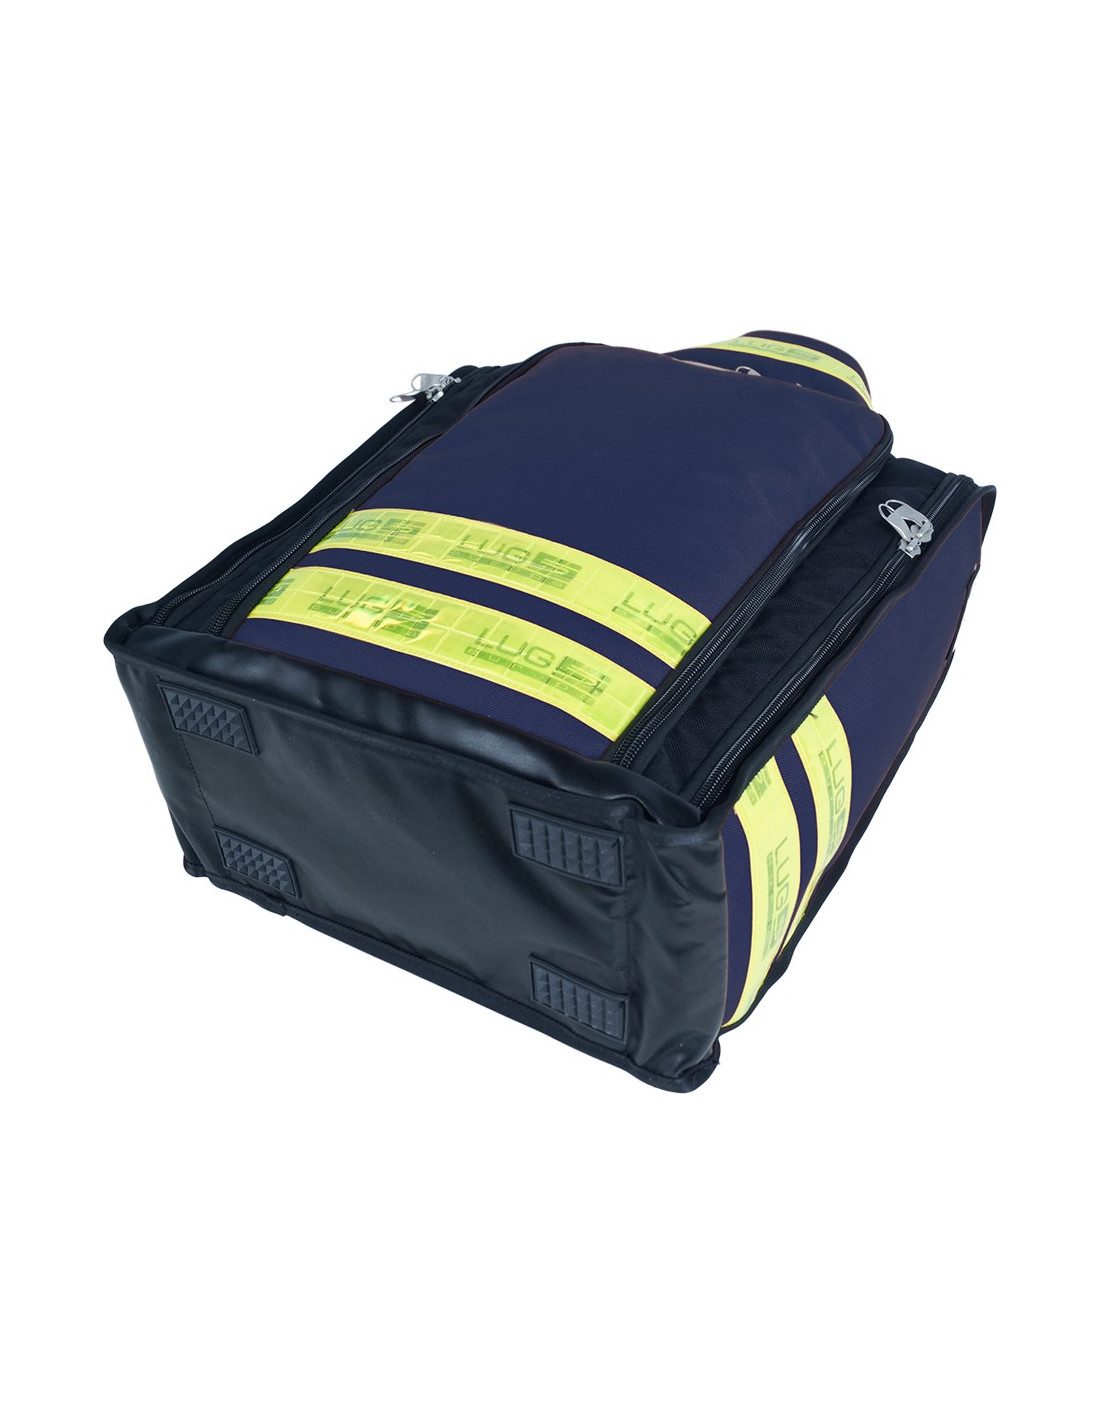 sac-secours-medical-o2-gamme-medicale (4)